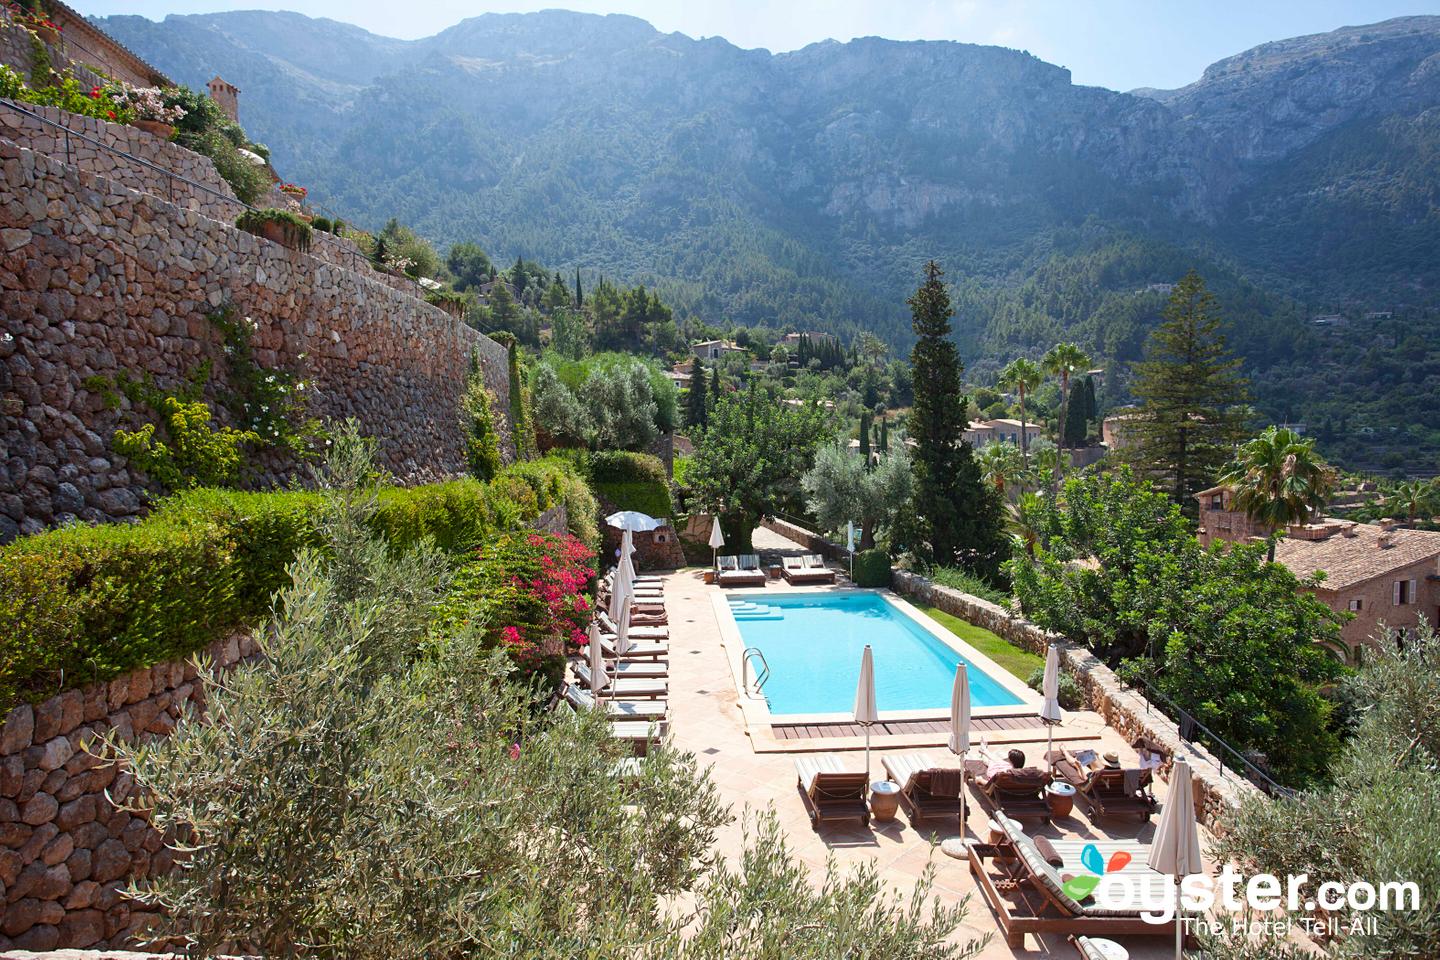 Belmond La Residencia Review: What To REALLY Expect If You Stay